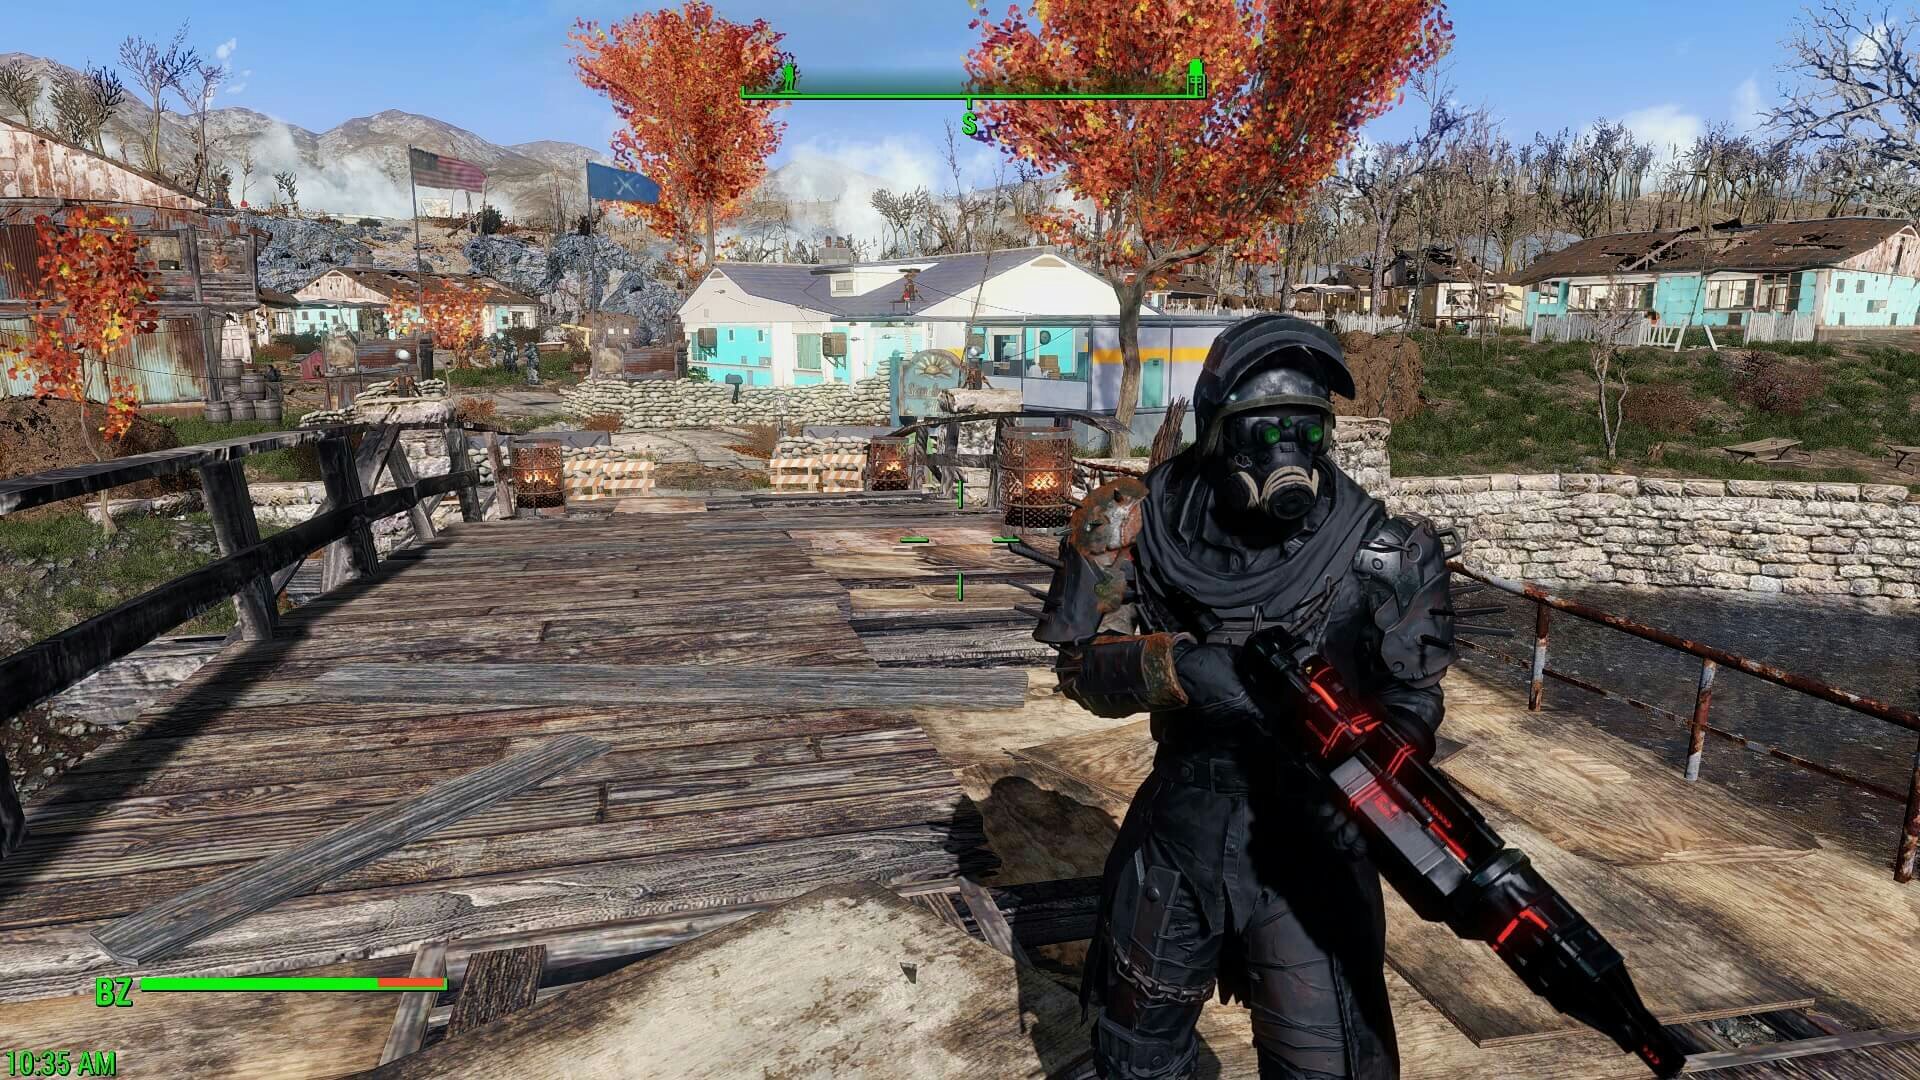 Best Fallout 4 Mods for PS4, PC and Xbox One (2020)